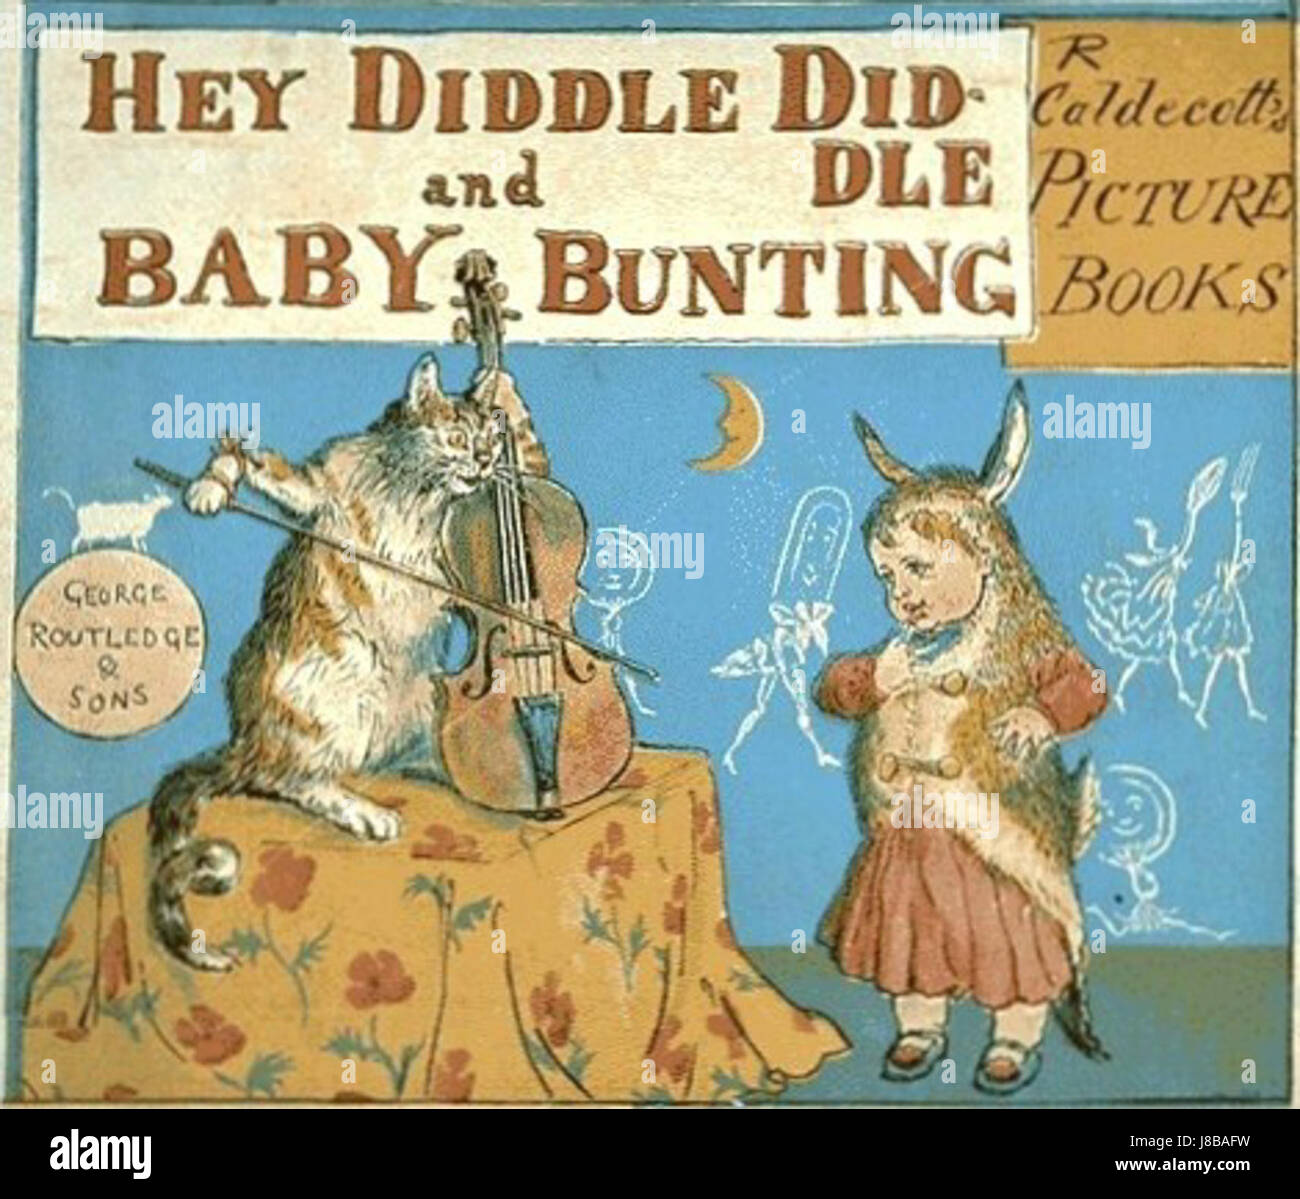 Hey diddle diddle and Baby bunting pg 1 Stock Photo